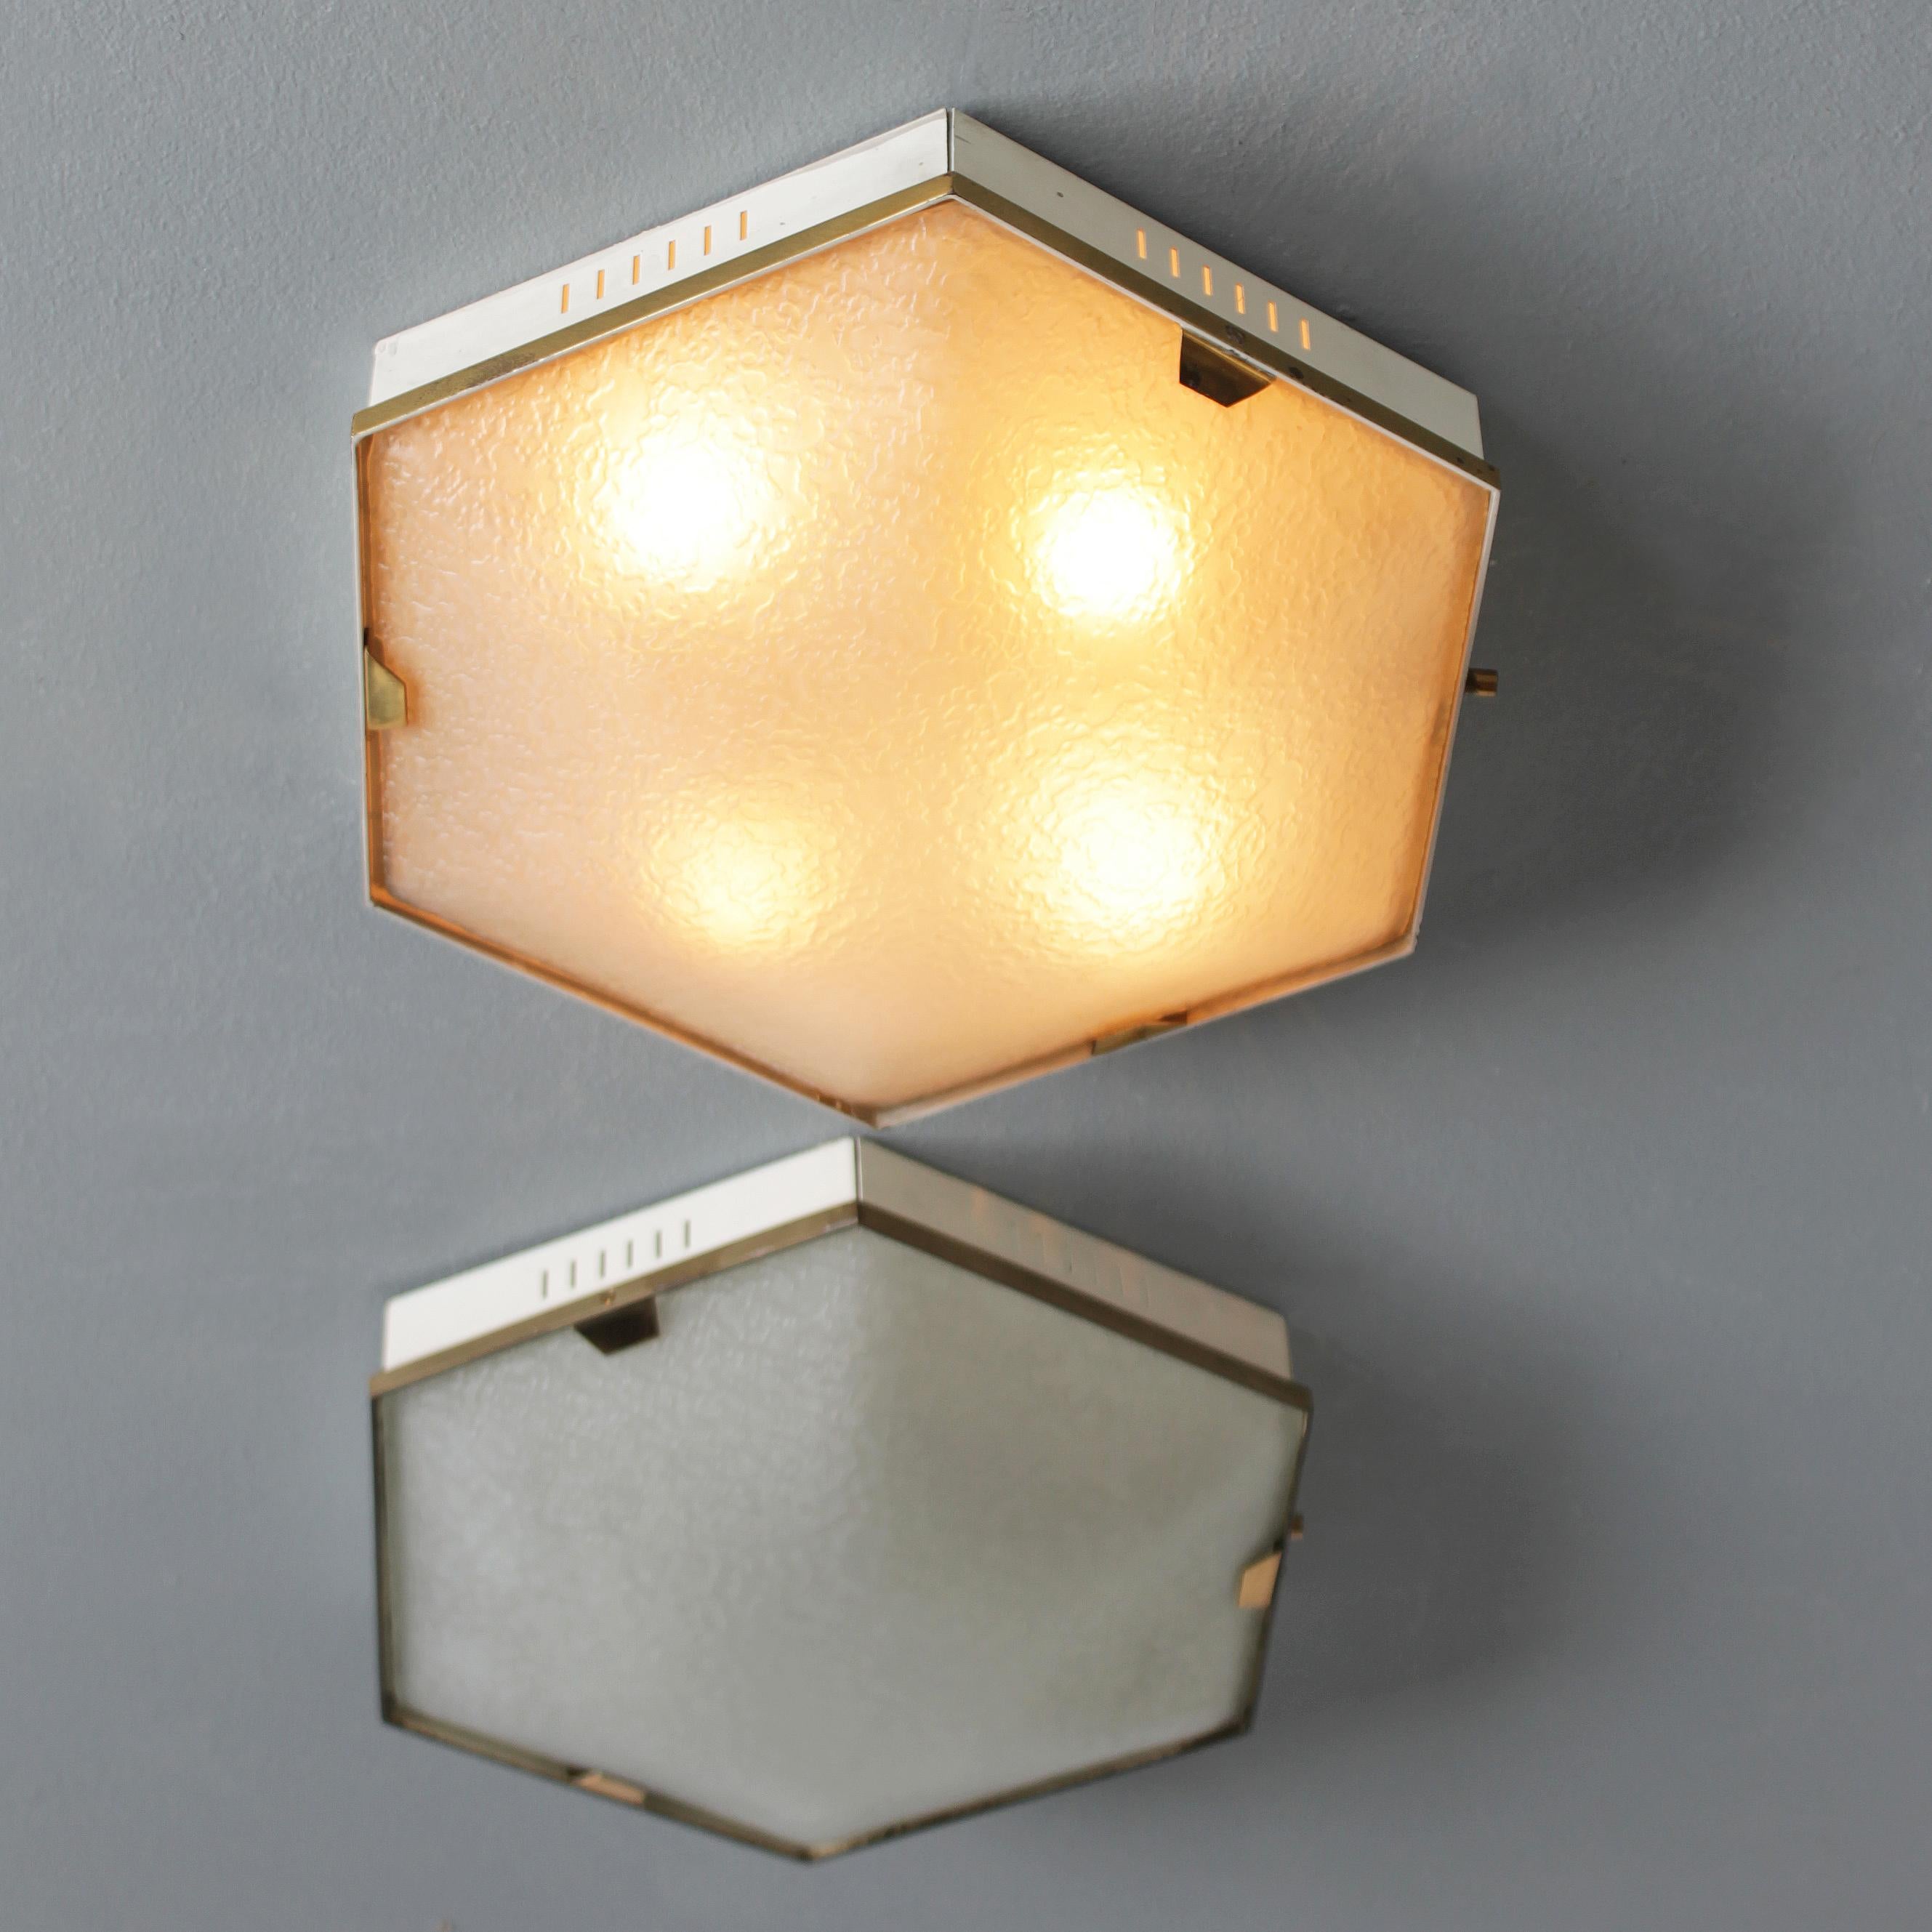 A set of two (2) hexagonal four light flush mounts or wall lamps by Stilnovo Milano, marked.
Stilnovo was founded in Milano by Bruno Gatta in 1946. Together with companies like Arteluce, Arredoluce and Fontana Arte, Stilnovo became one of the